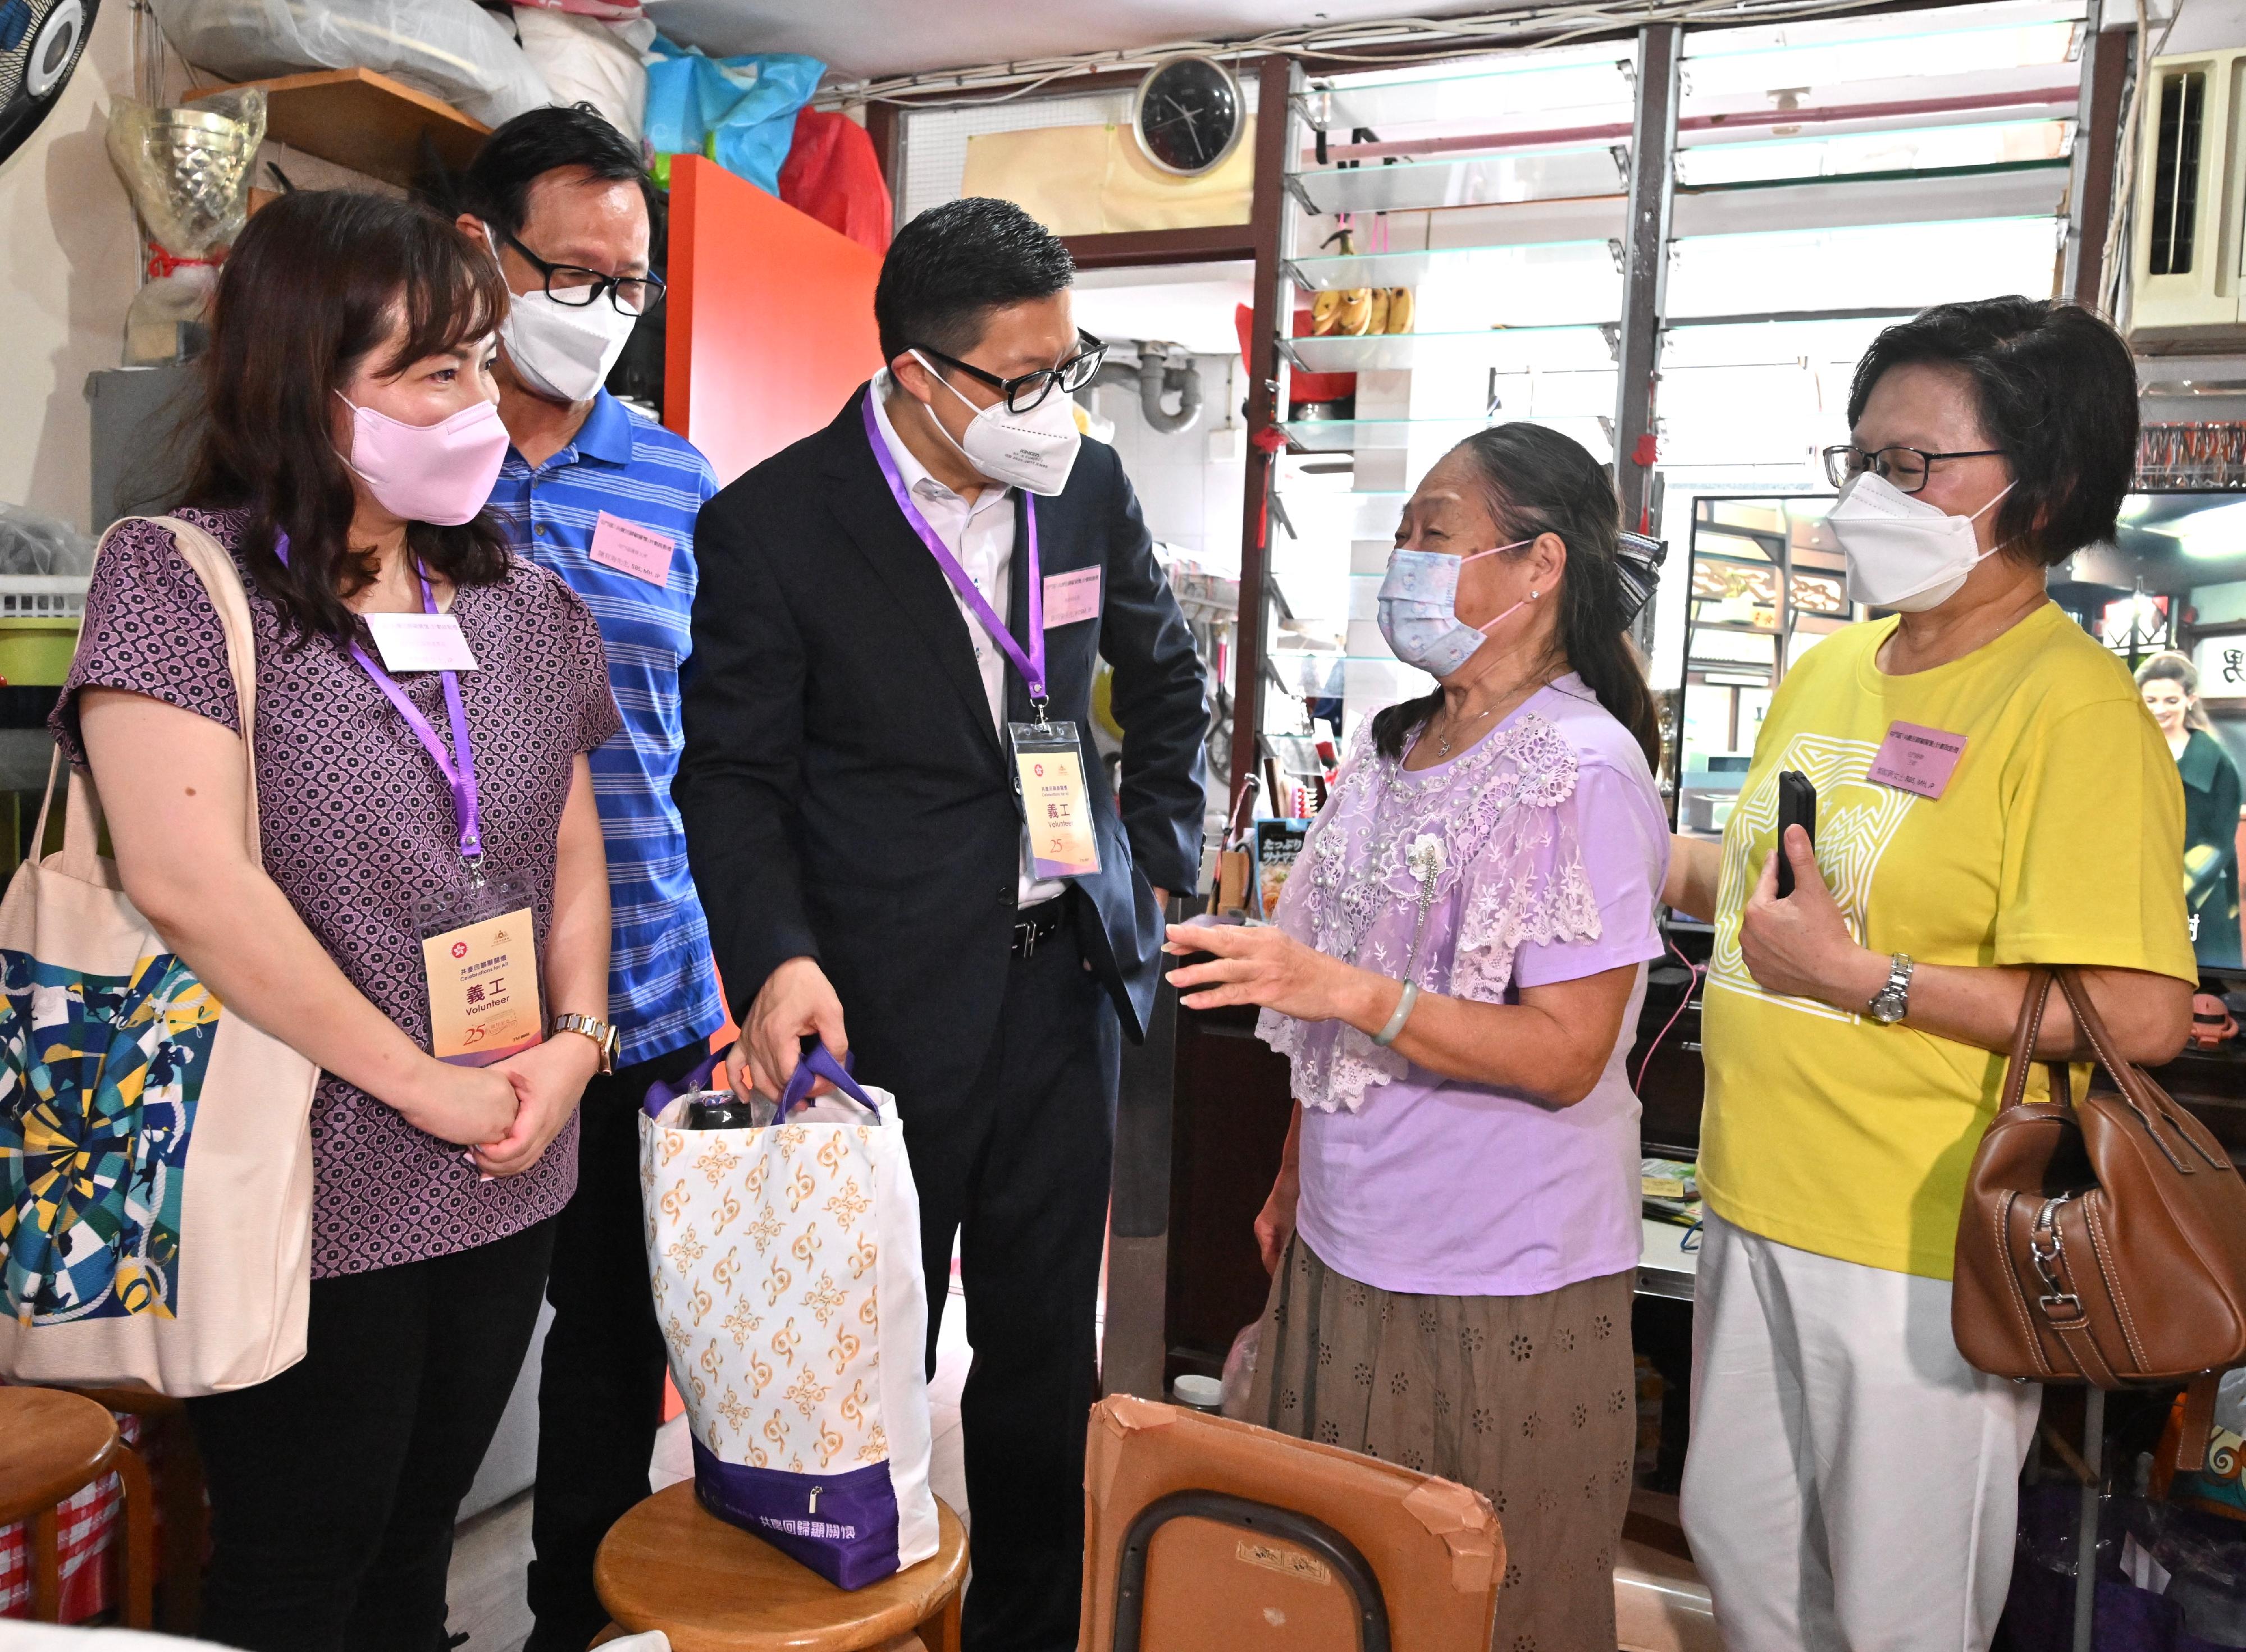 The Secretary for Security, Mr Tang Ping-keung, today (June 19) paid home visits under the Celebrations for All project in Tuen Mun District to show his care and concern for the grass-roots families, and distributed gift packs in celebration of the 25th anniversary of the establishment of the Hong Kong Special Administrative Region (HKSAR). Photo shows Mr Tang (centre) visiting an elderly household in Tai Hing Estate and sending them gift packs to convey blessings to the family on behalf of the HKSAR Government.